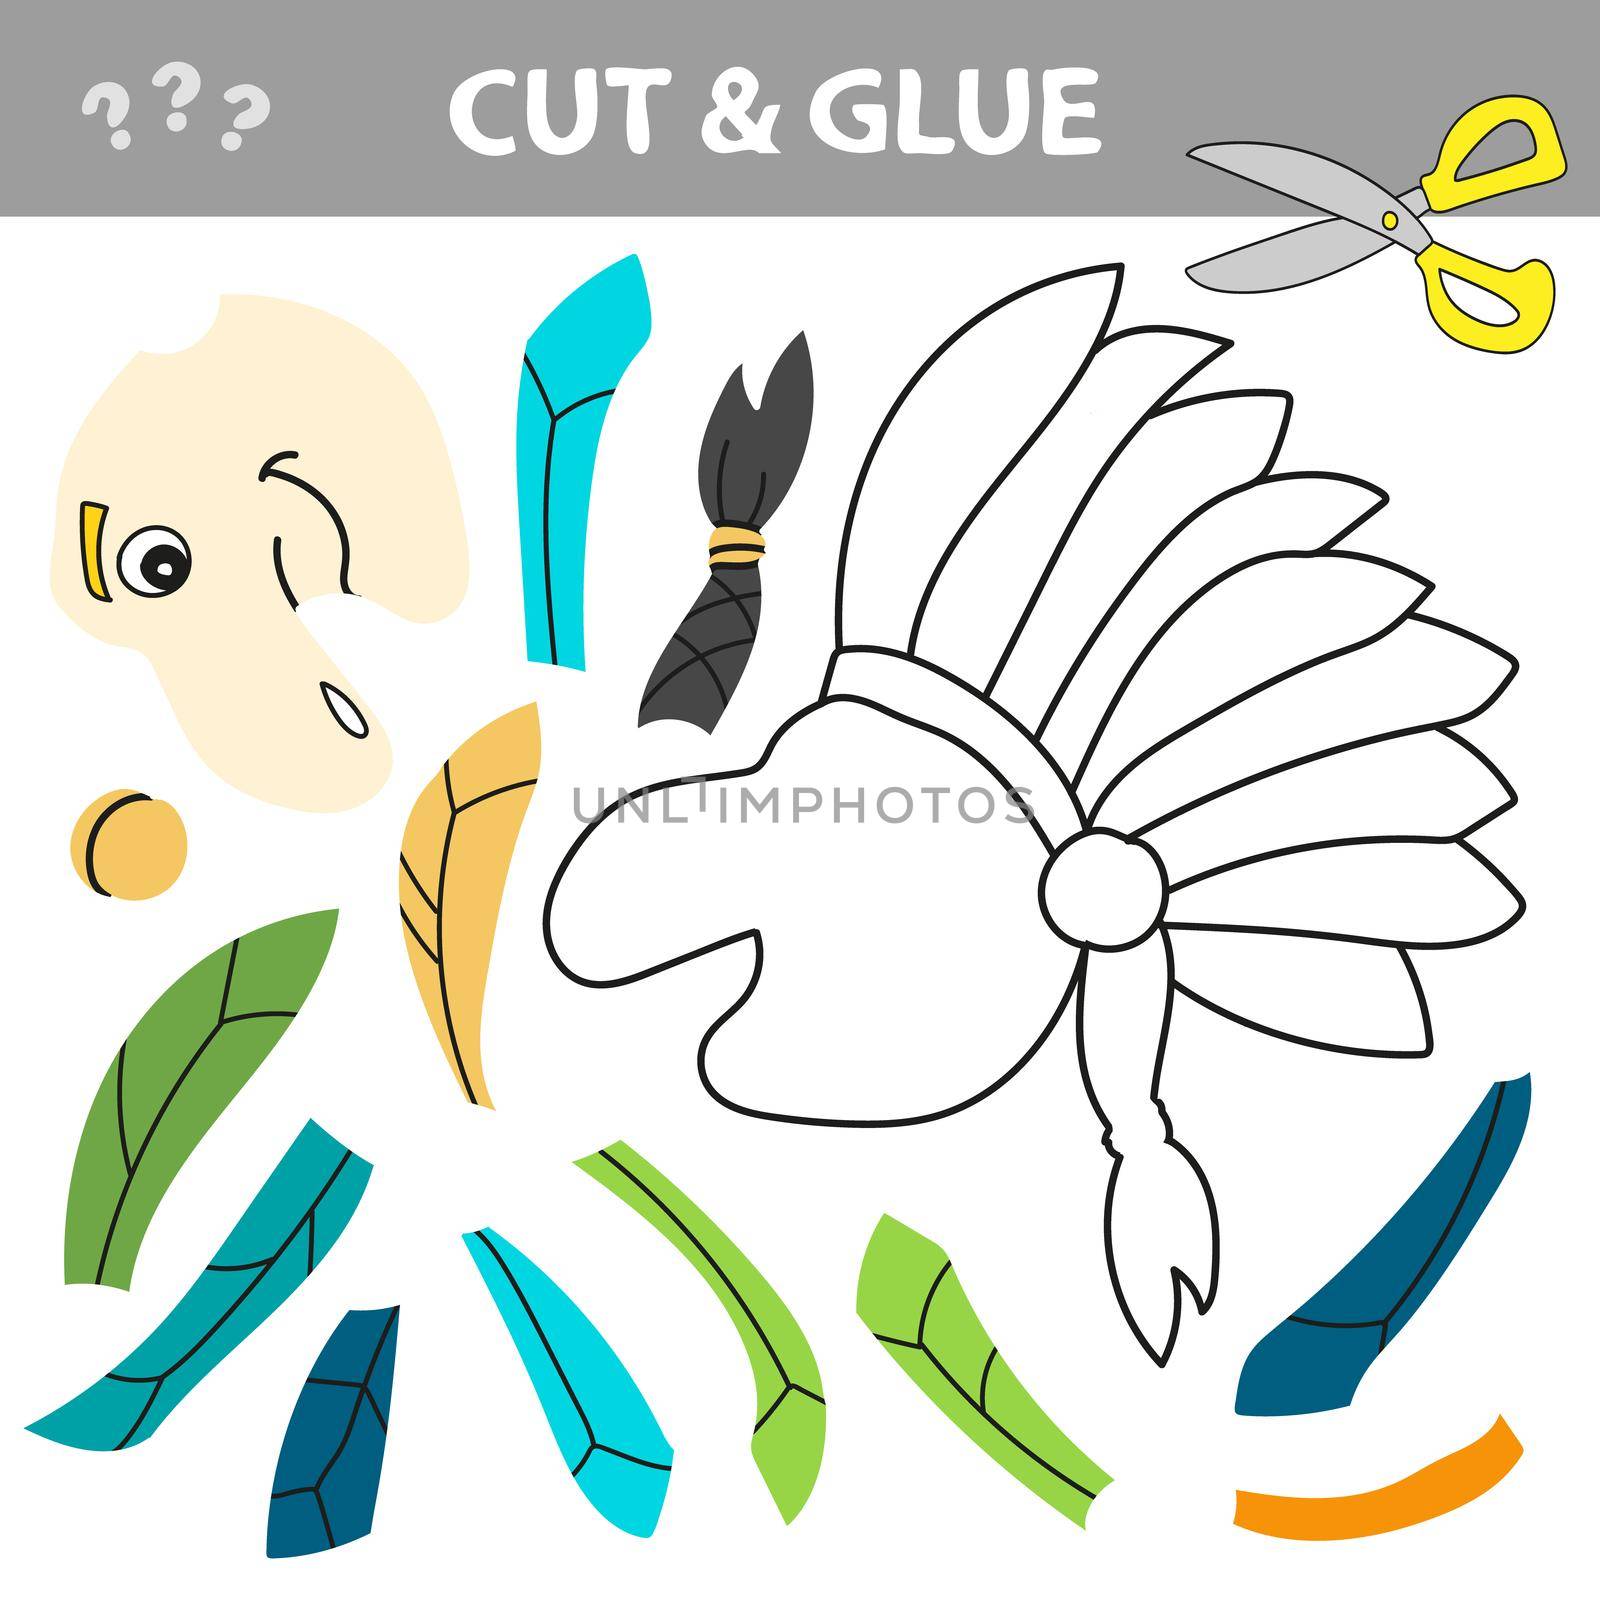 Cut and glue - Simple game for kids. Native Indian man with feather headdress. Education paper game for preshool children. Vector illustration.